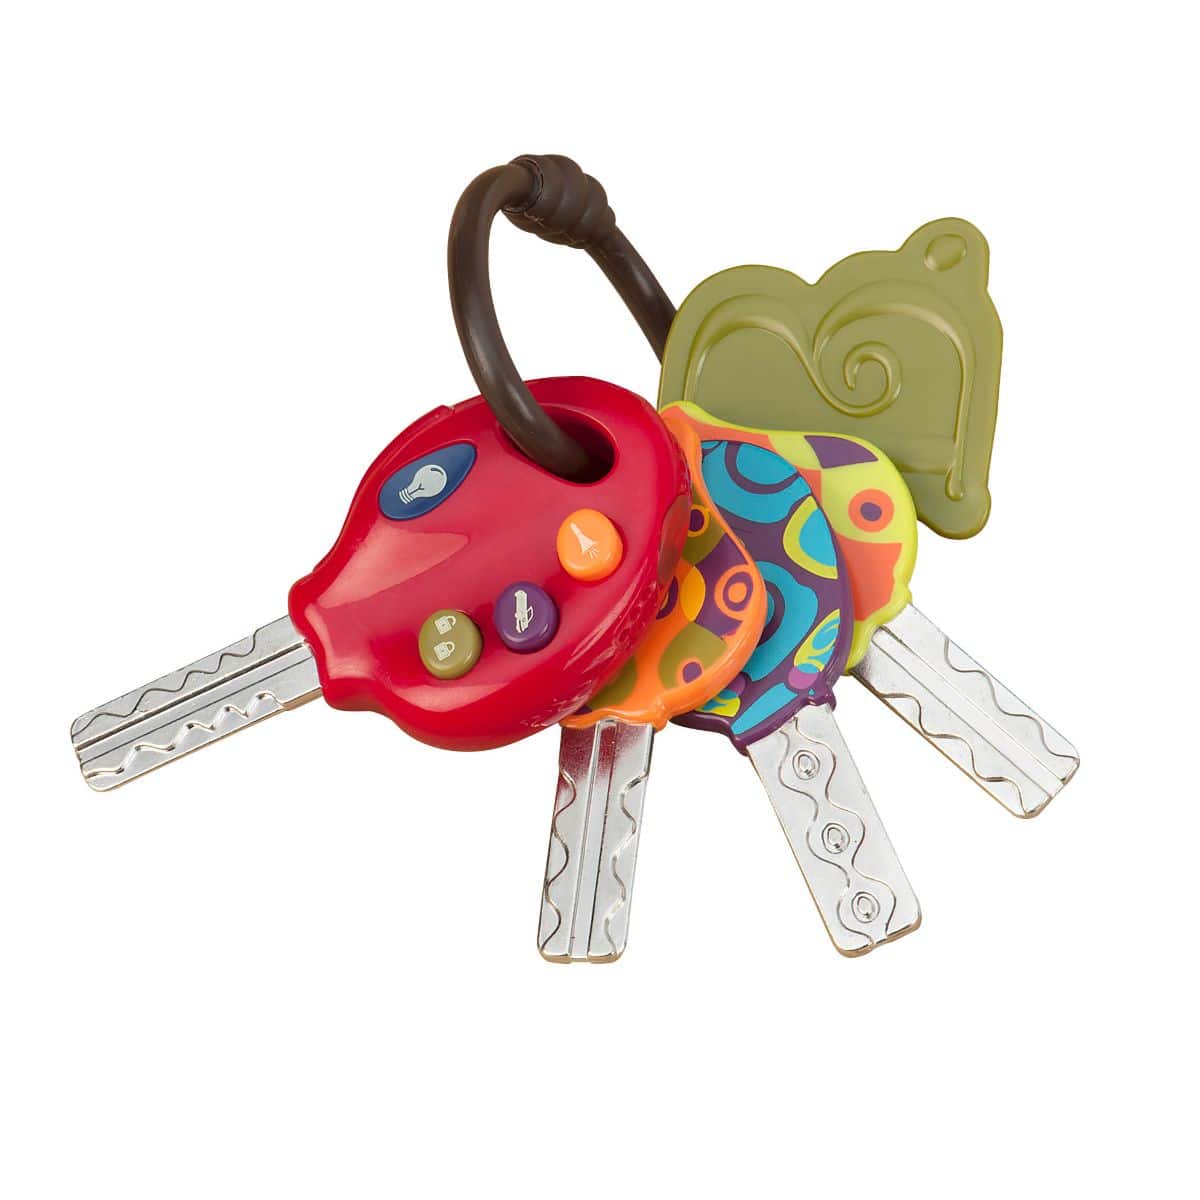 LucKeys - Red, Toy Car Keys with Lights & Sounds